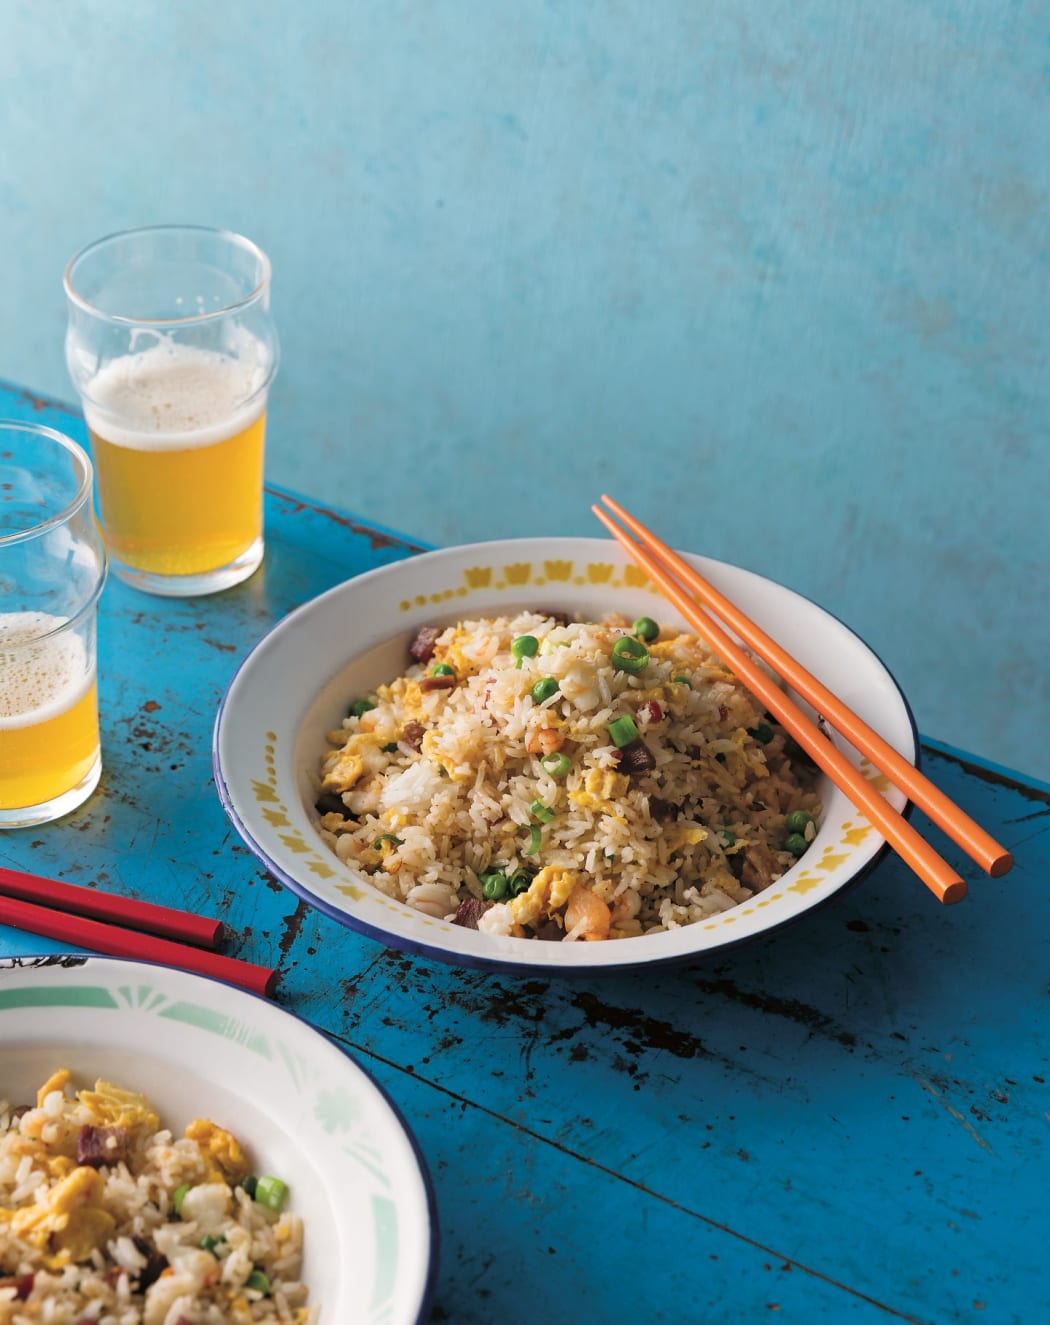 Yeung chow fried rice - from Hong Kong Food City Tony Tan. Photography by Greg Elms. Murdoch Books